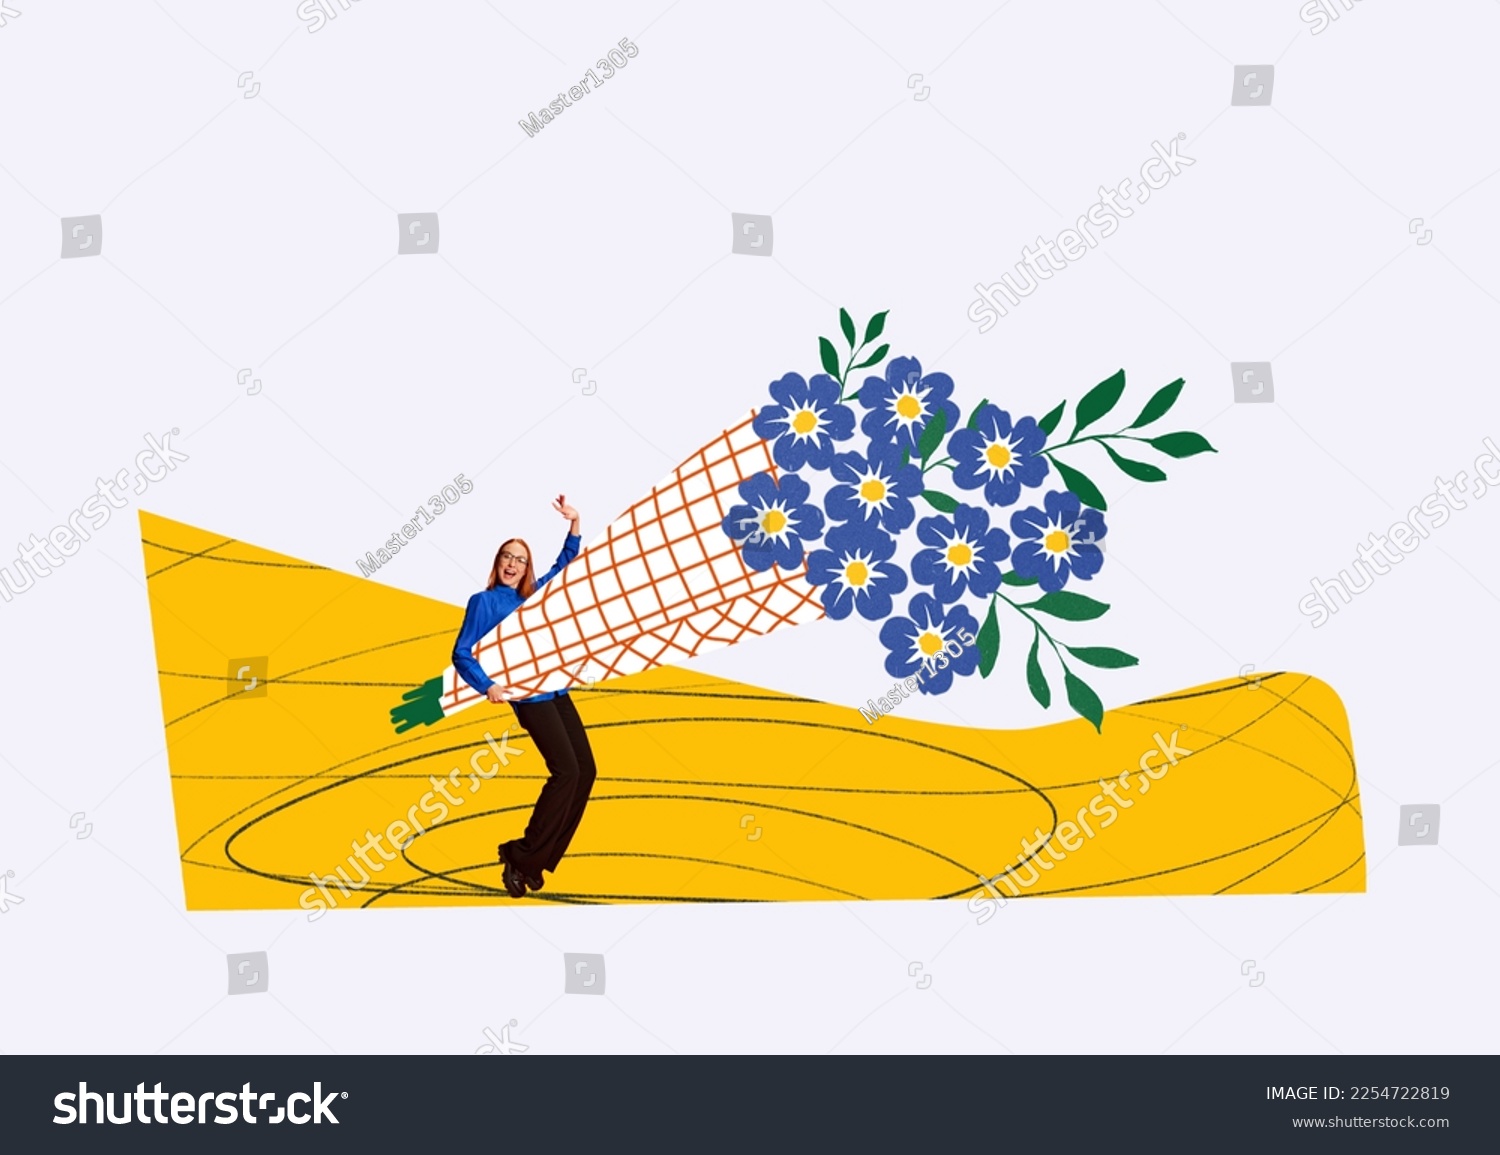 Creative colorful design. Happy smiling young girl holding big bouquet of blue flowers over light background. Concept of holiday, women's day, positive mood, celebration. Copy space for ad #2254722819